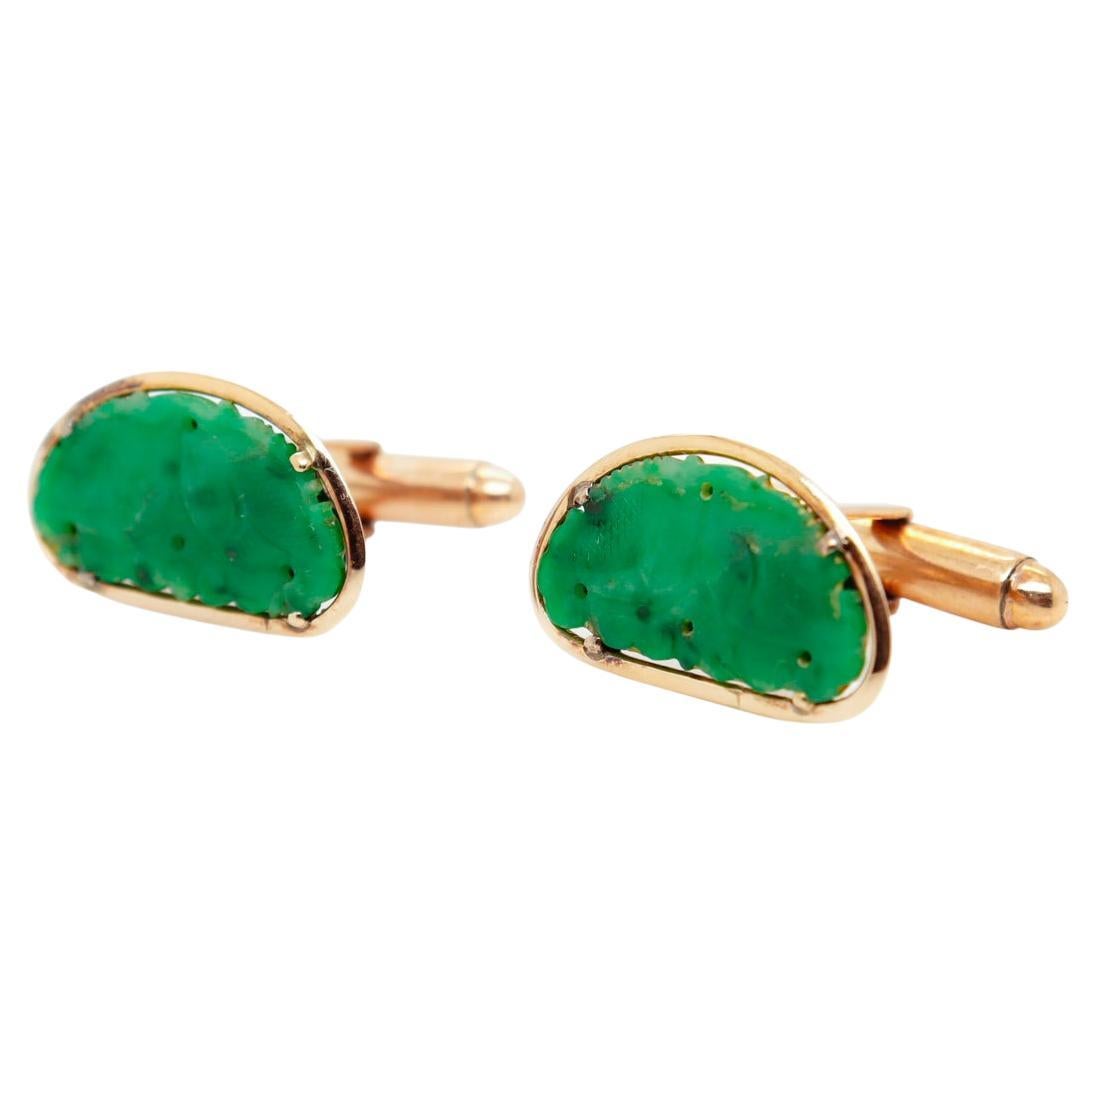 Old or Antique Chinese 14k Gold & Jade Cufflinks For Sale